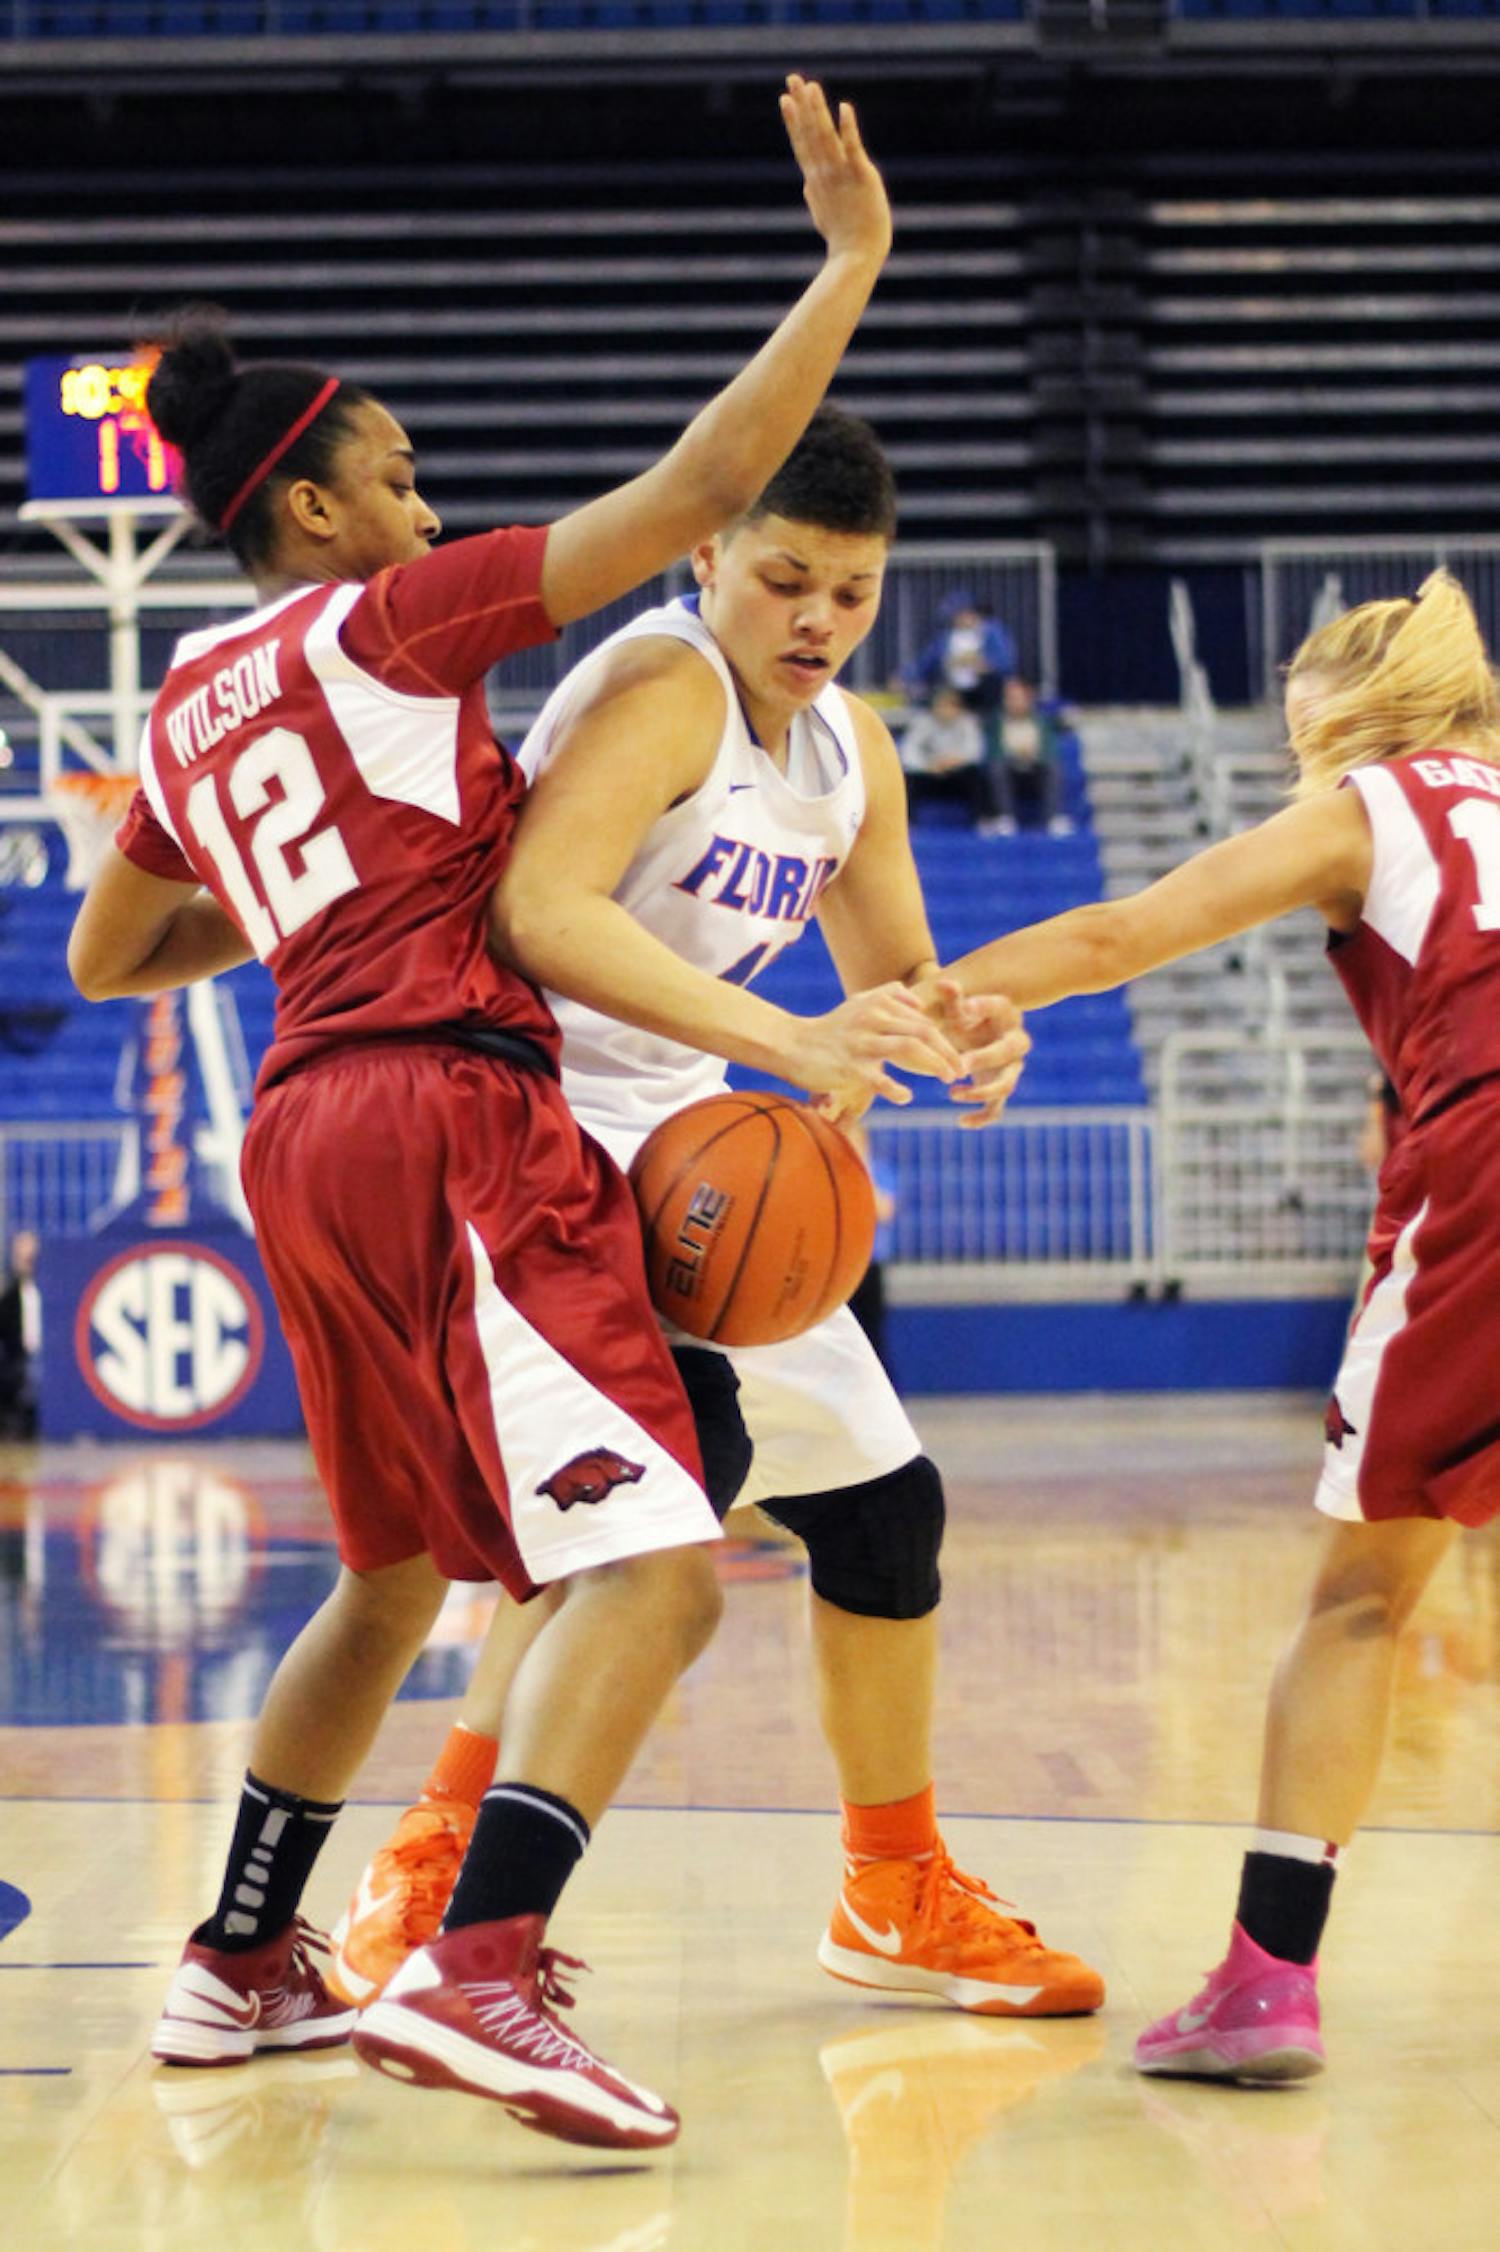 Freshman guard Sydney Moss loses her grip on the ball during Florida 69-58 loss to Arkansas on Feb. 28 in the O’Connell Center.